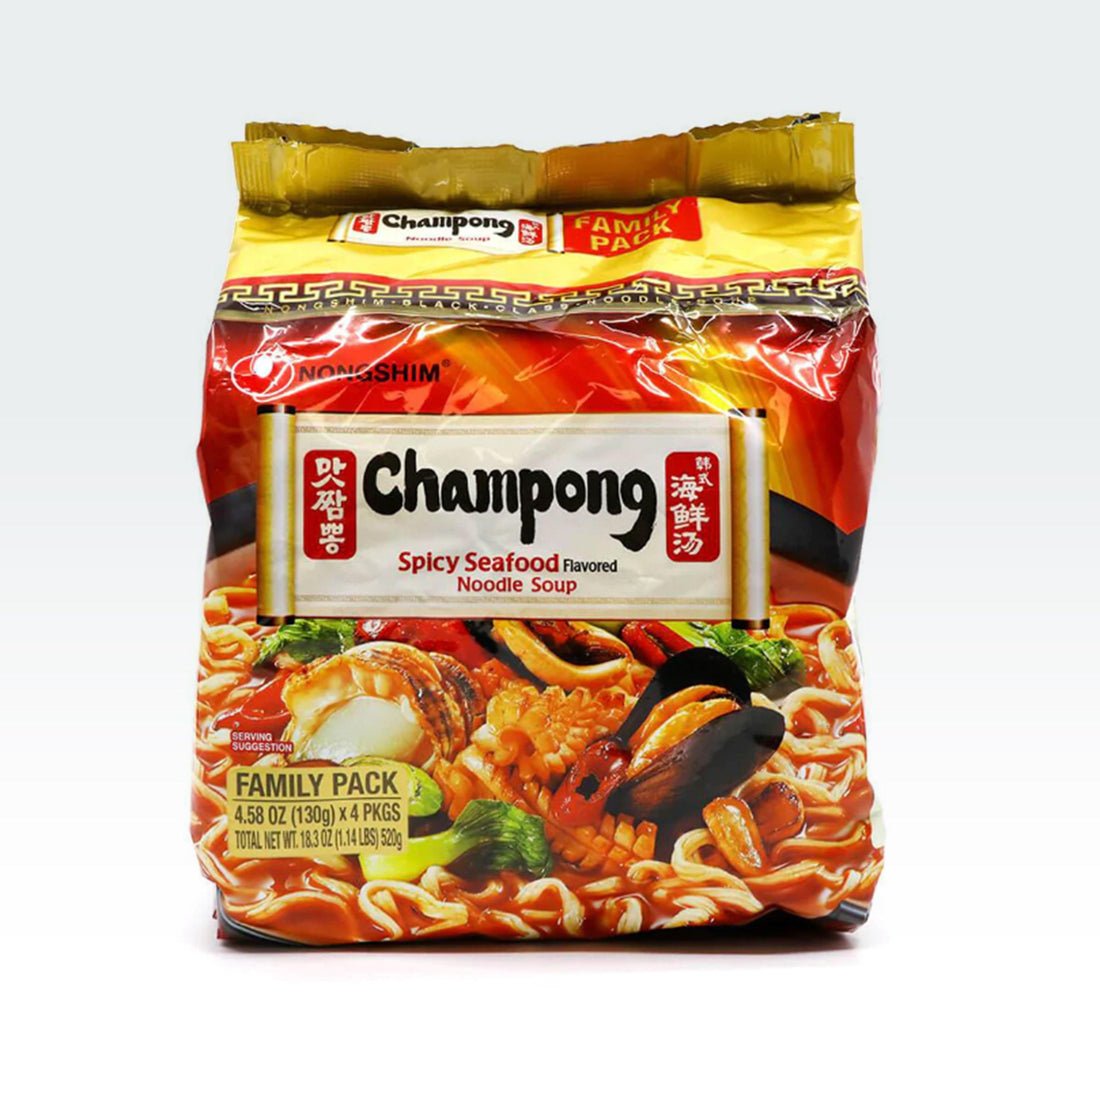 Nongshim Champong Spicy Seafood Noodle Soup 4.58oz(130g) x 4 Packs - Anytime Basket